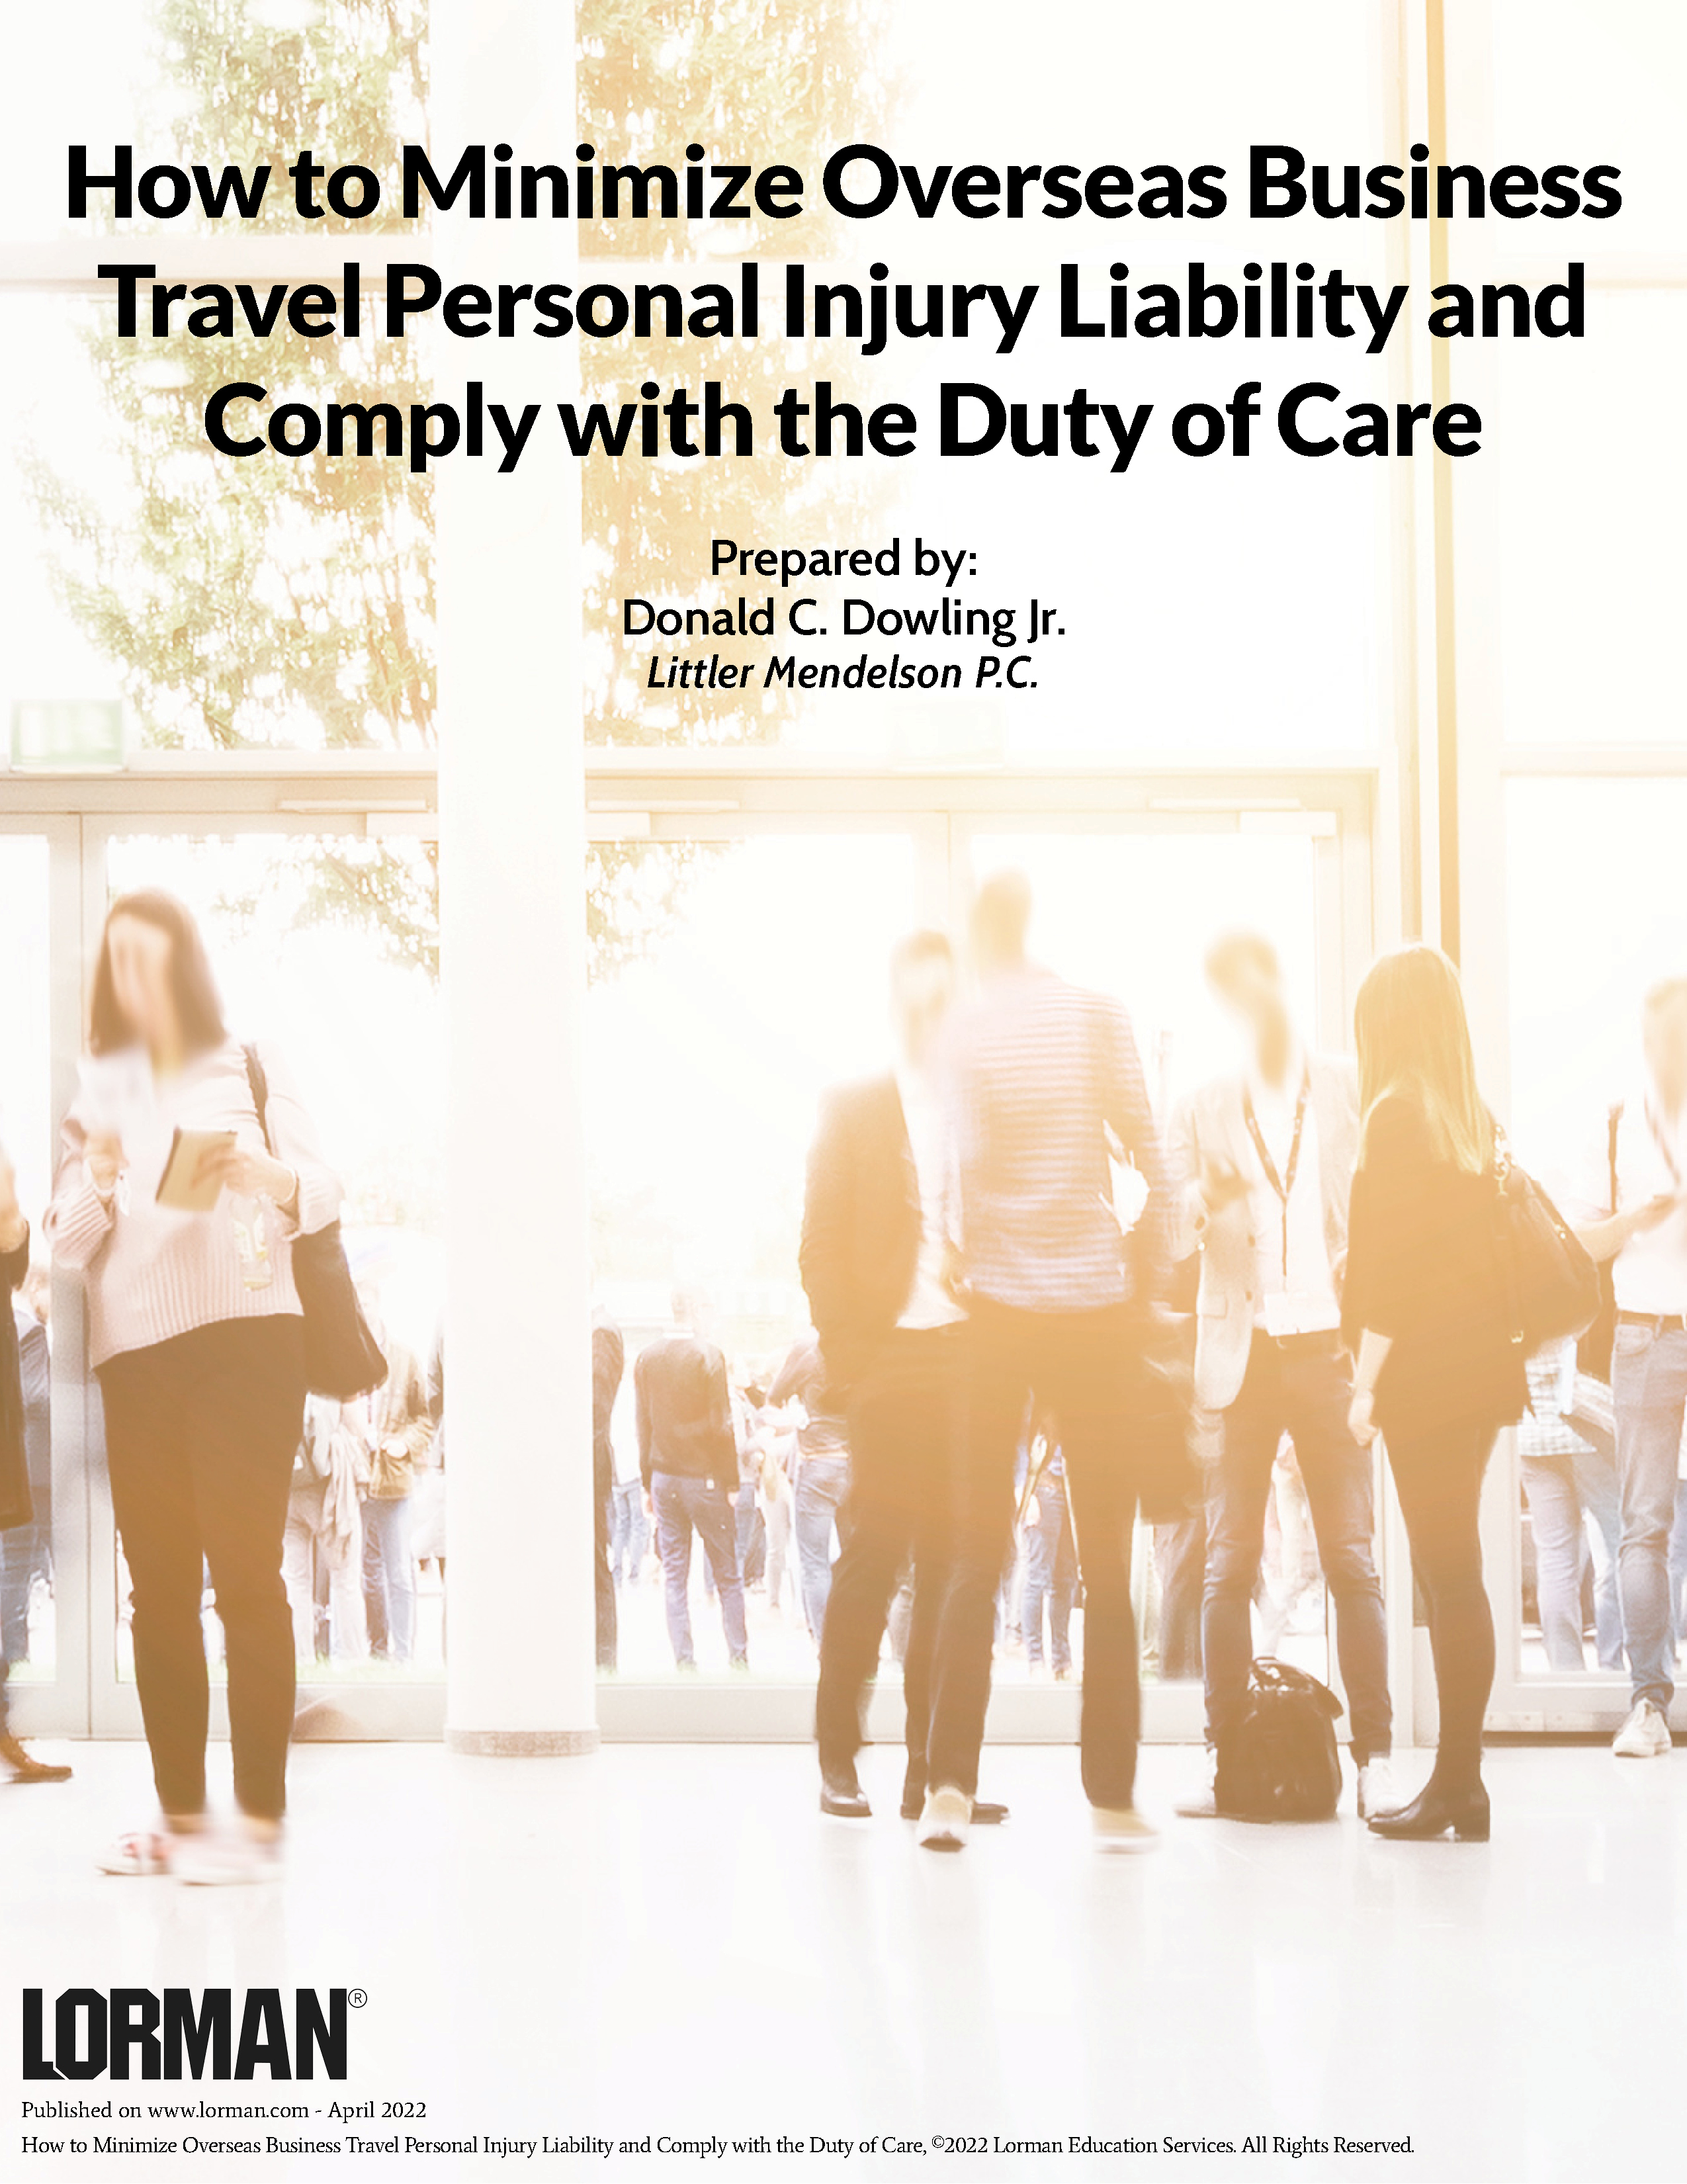 How to Minimize Overseas Business Travel Personal Injury Liability and Comply with the Duty of Care